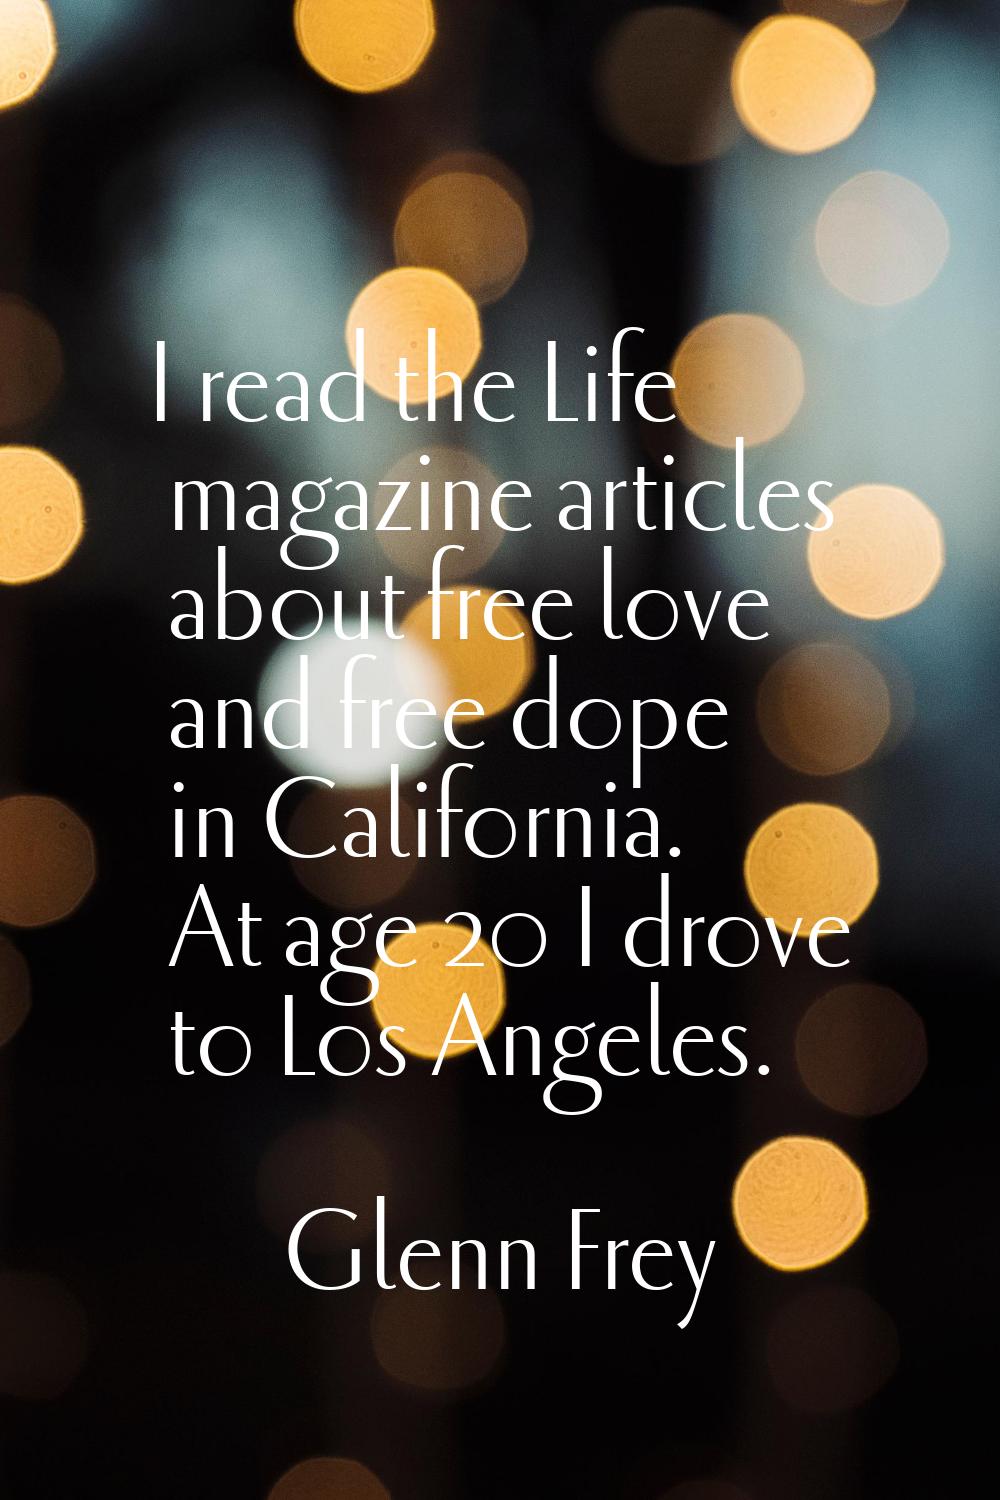 I read the Life magazine articles about free love and free dope in California. At age 20 I drove to